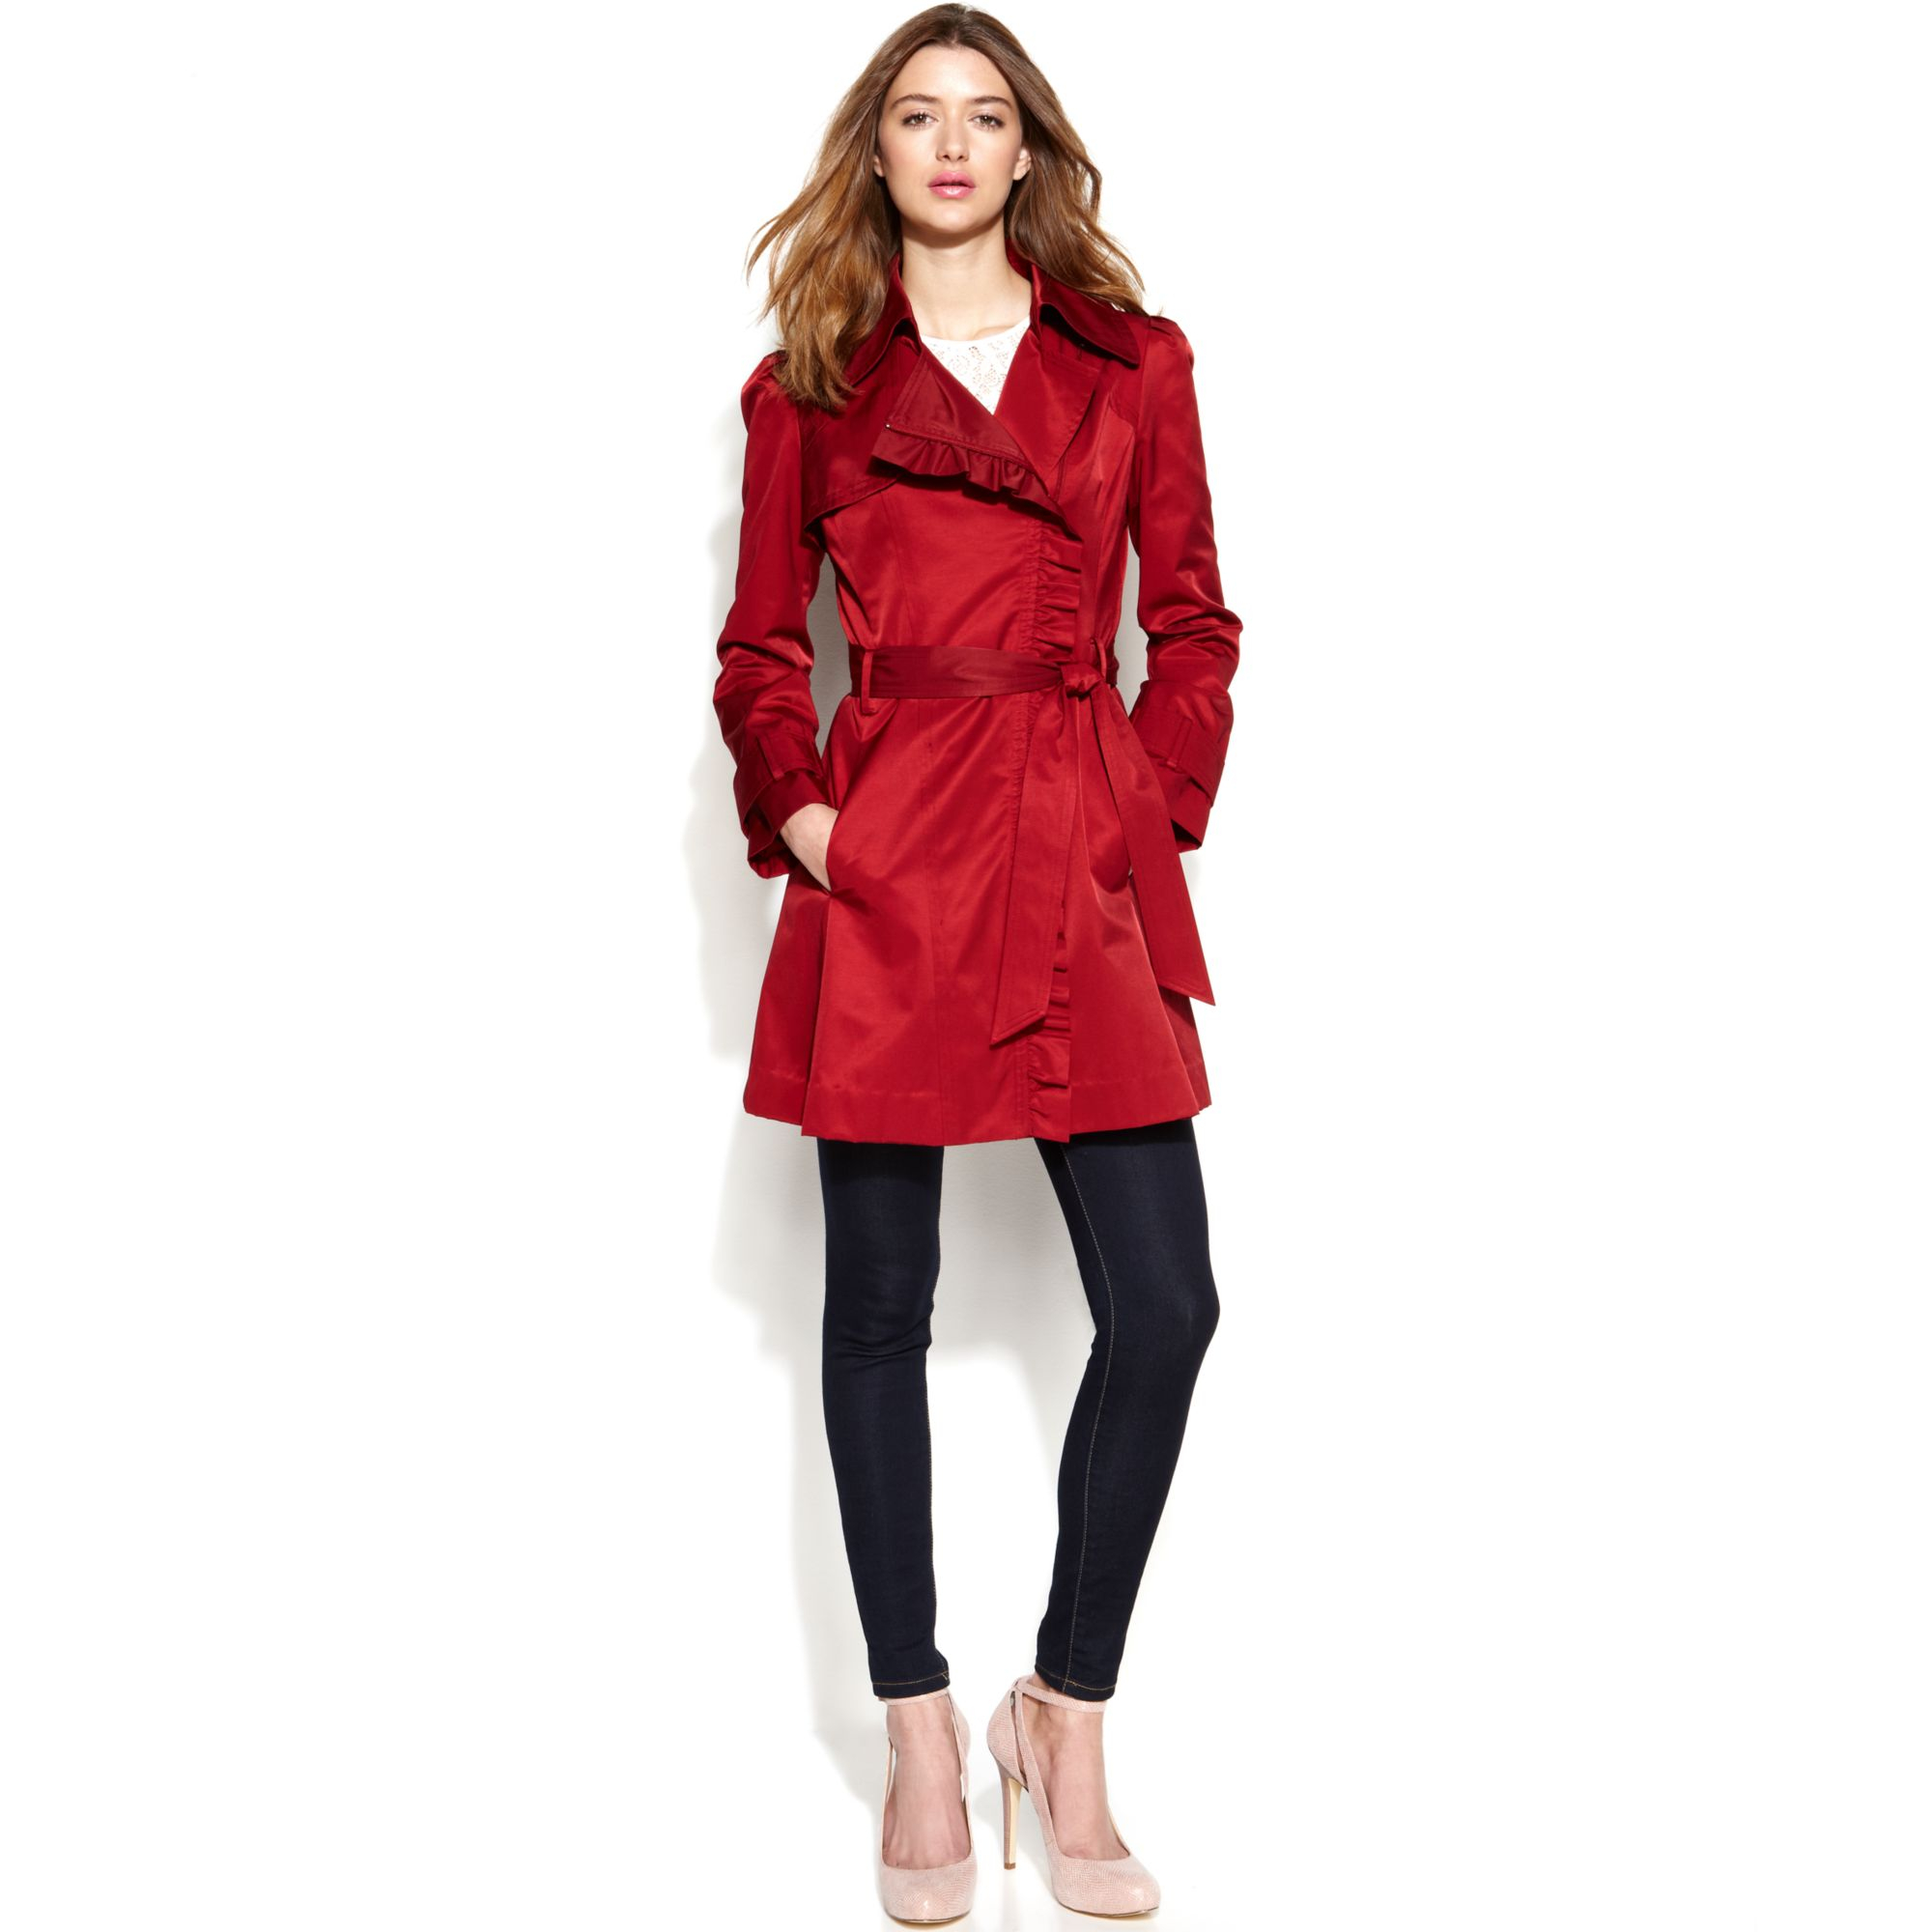 Jessica Simpson Ruffletrim Belted Trench Coat in Red (Cabernet) | Lyst2000 x 2000